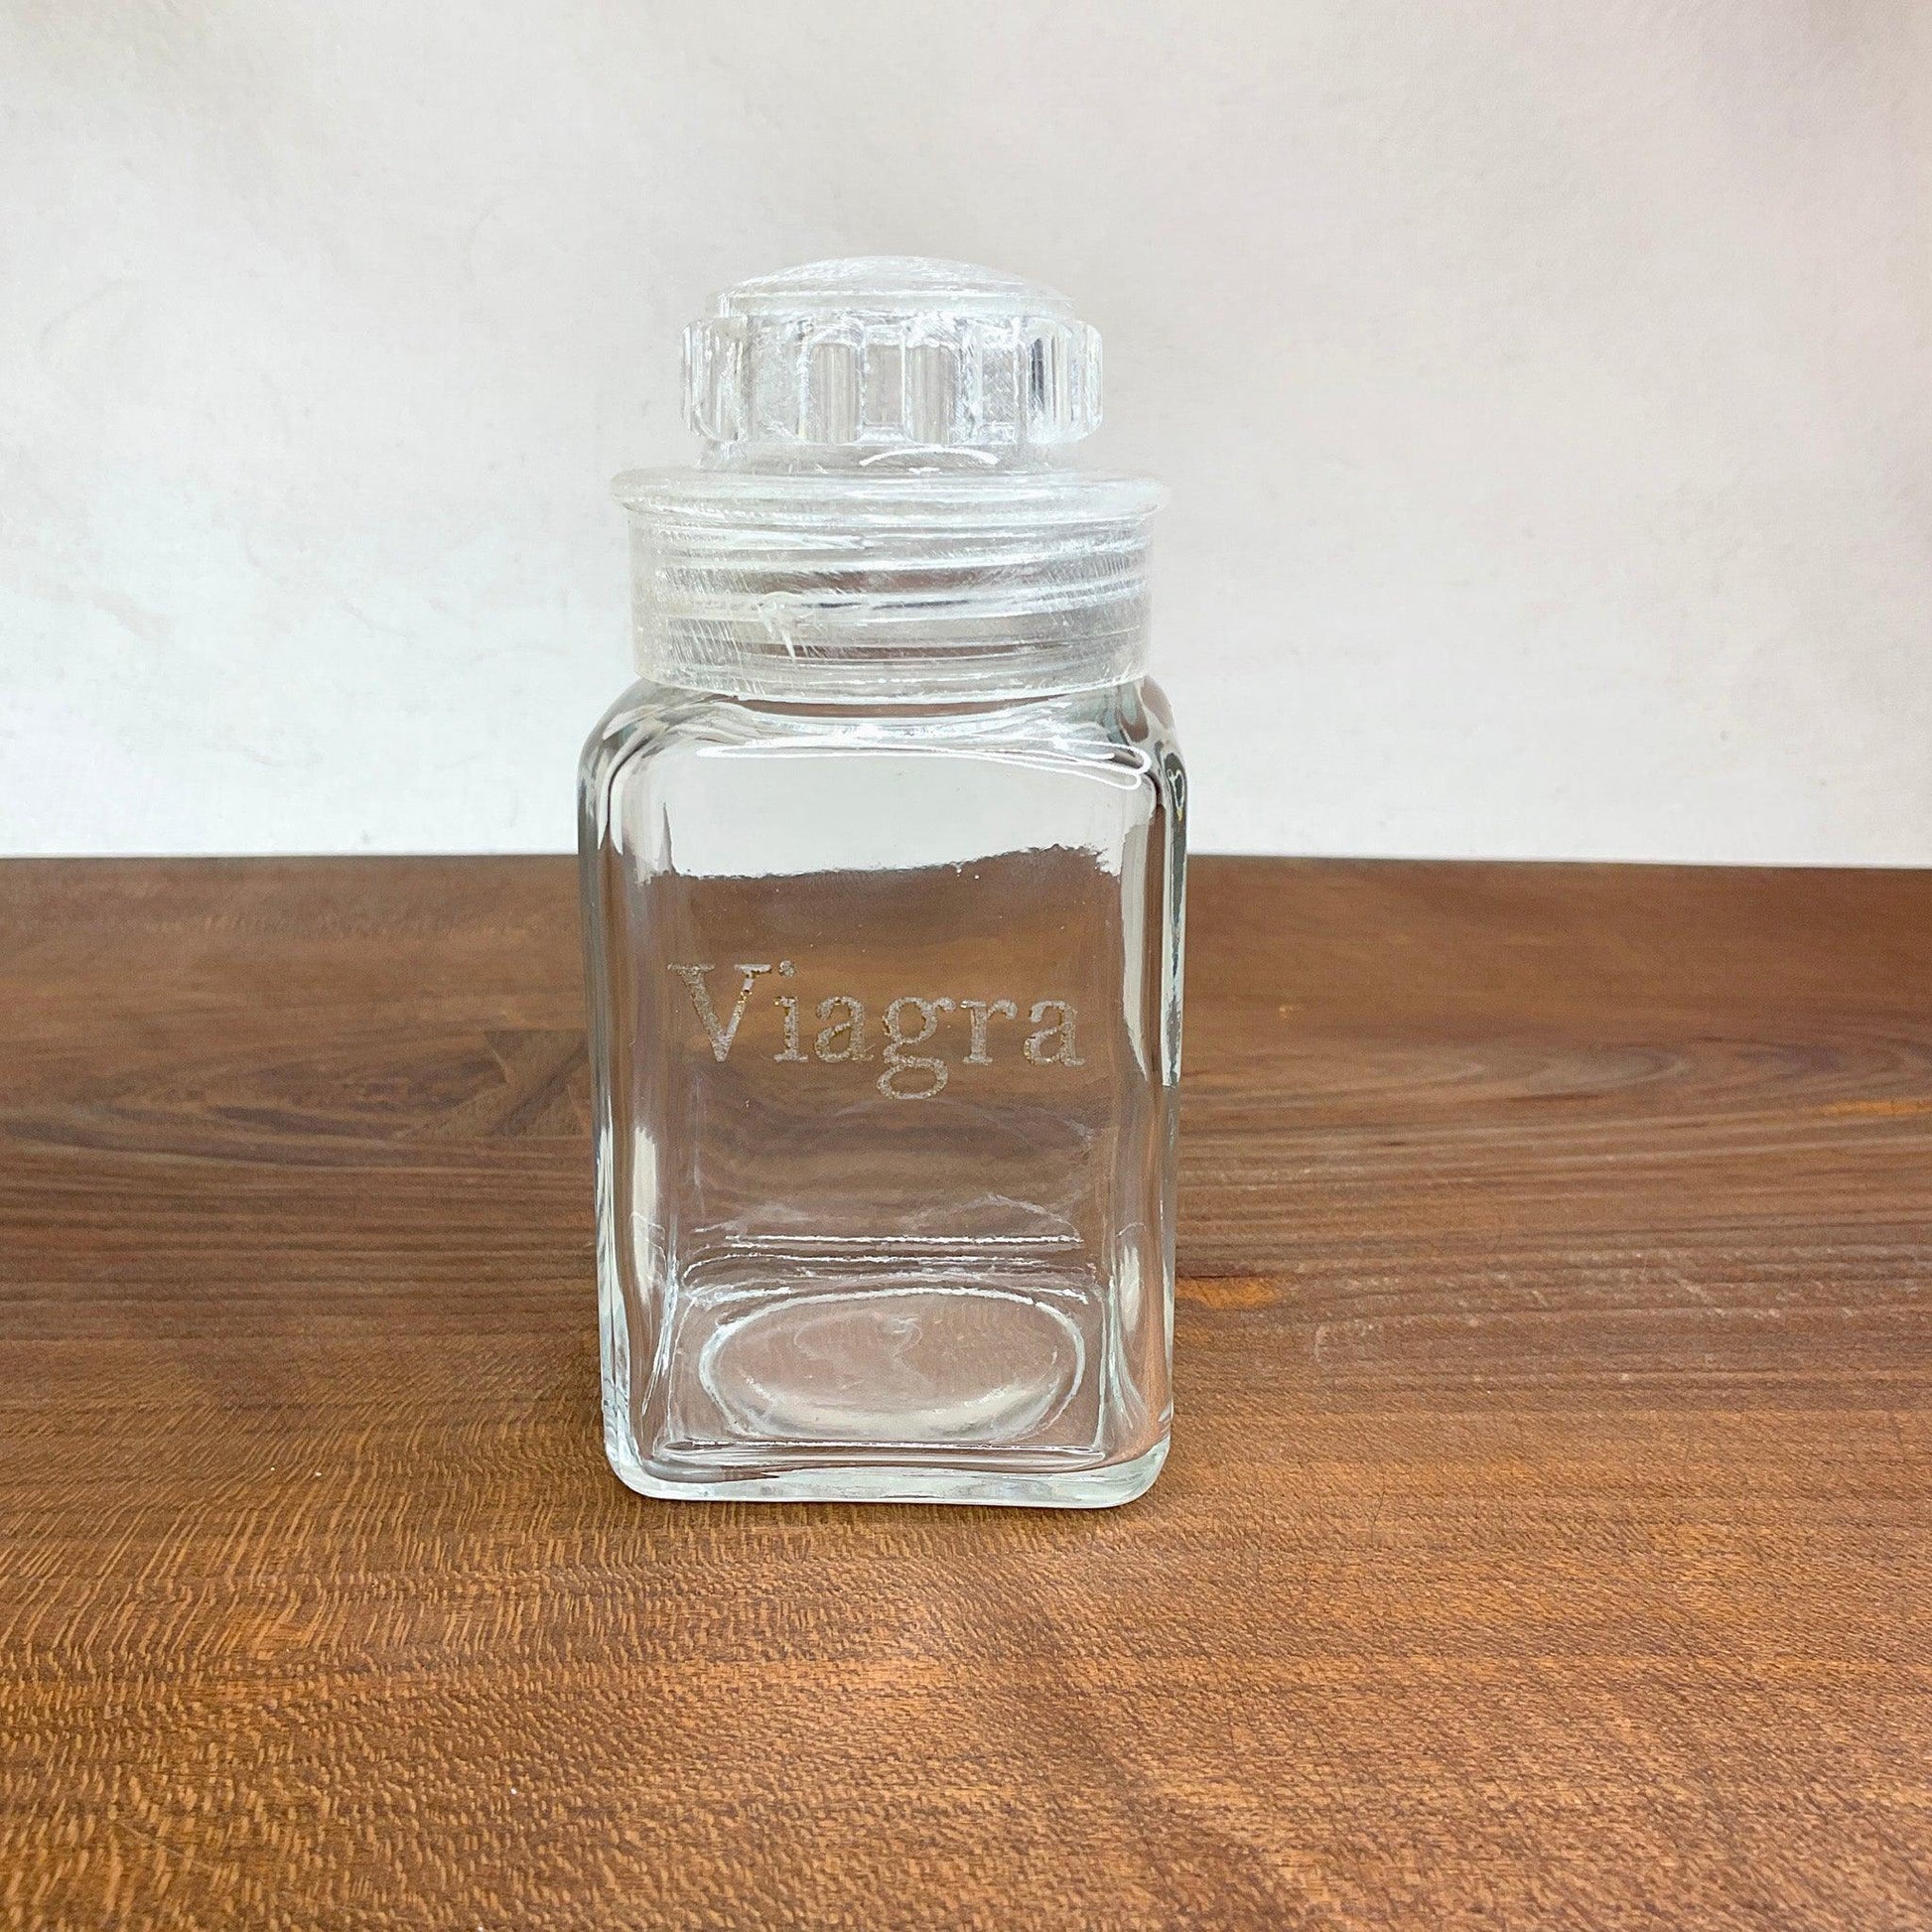 Viagra Apothecary Jar - Offensively Domestic